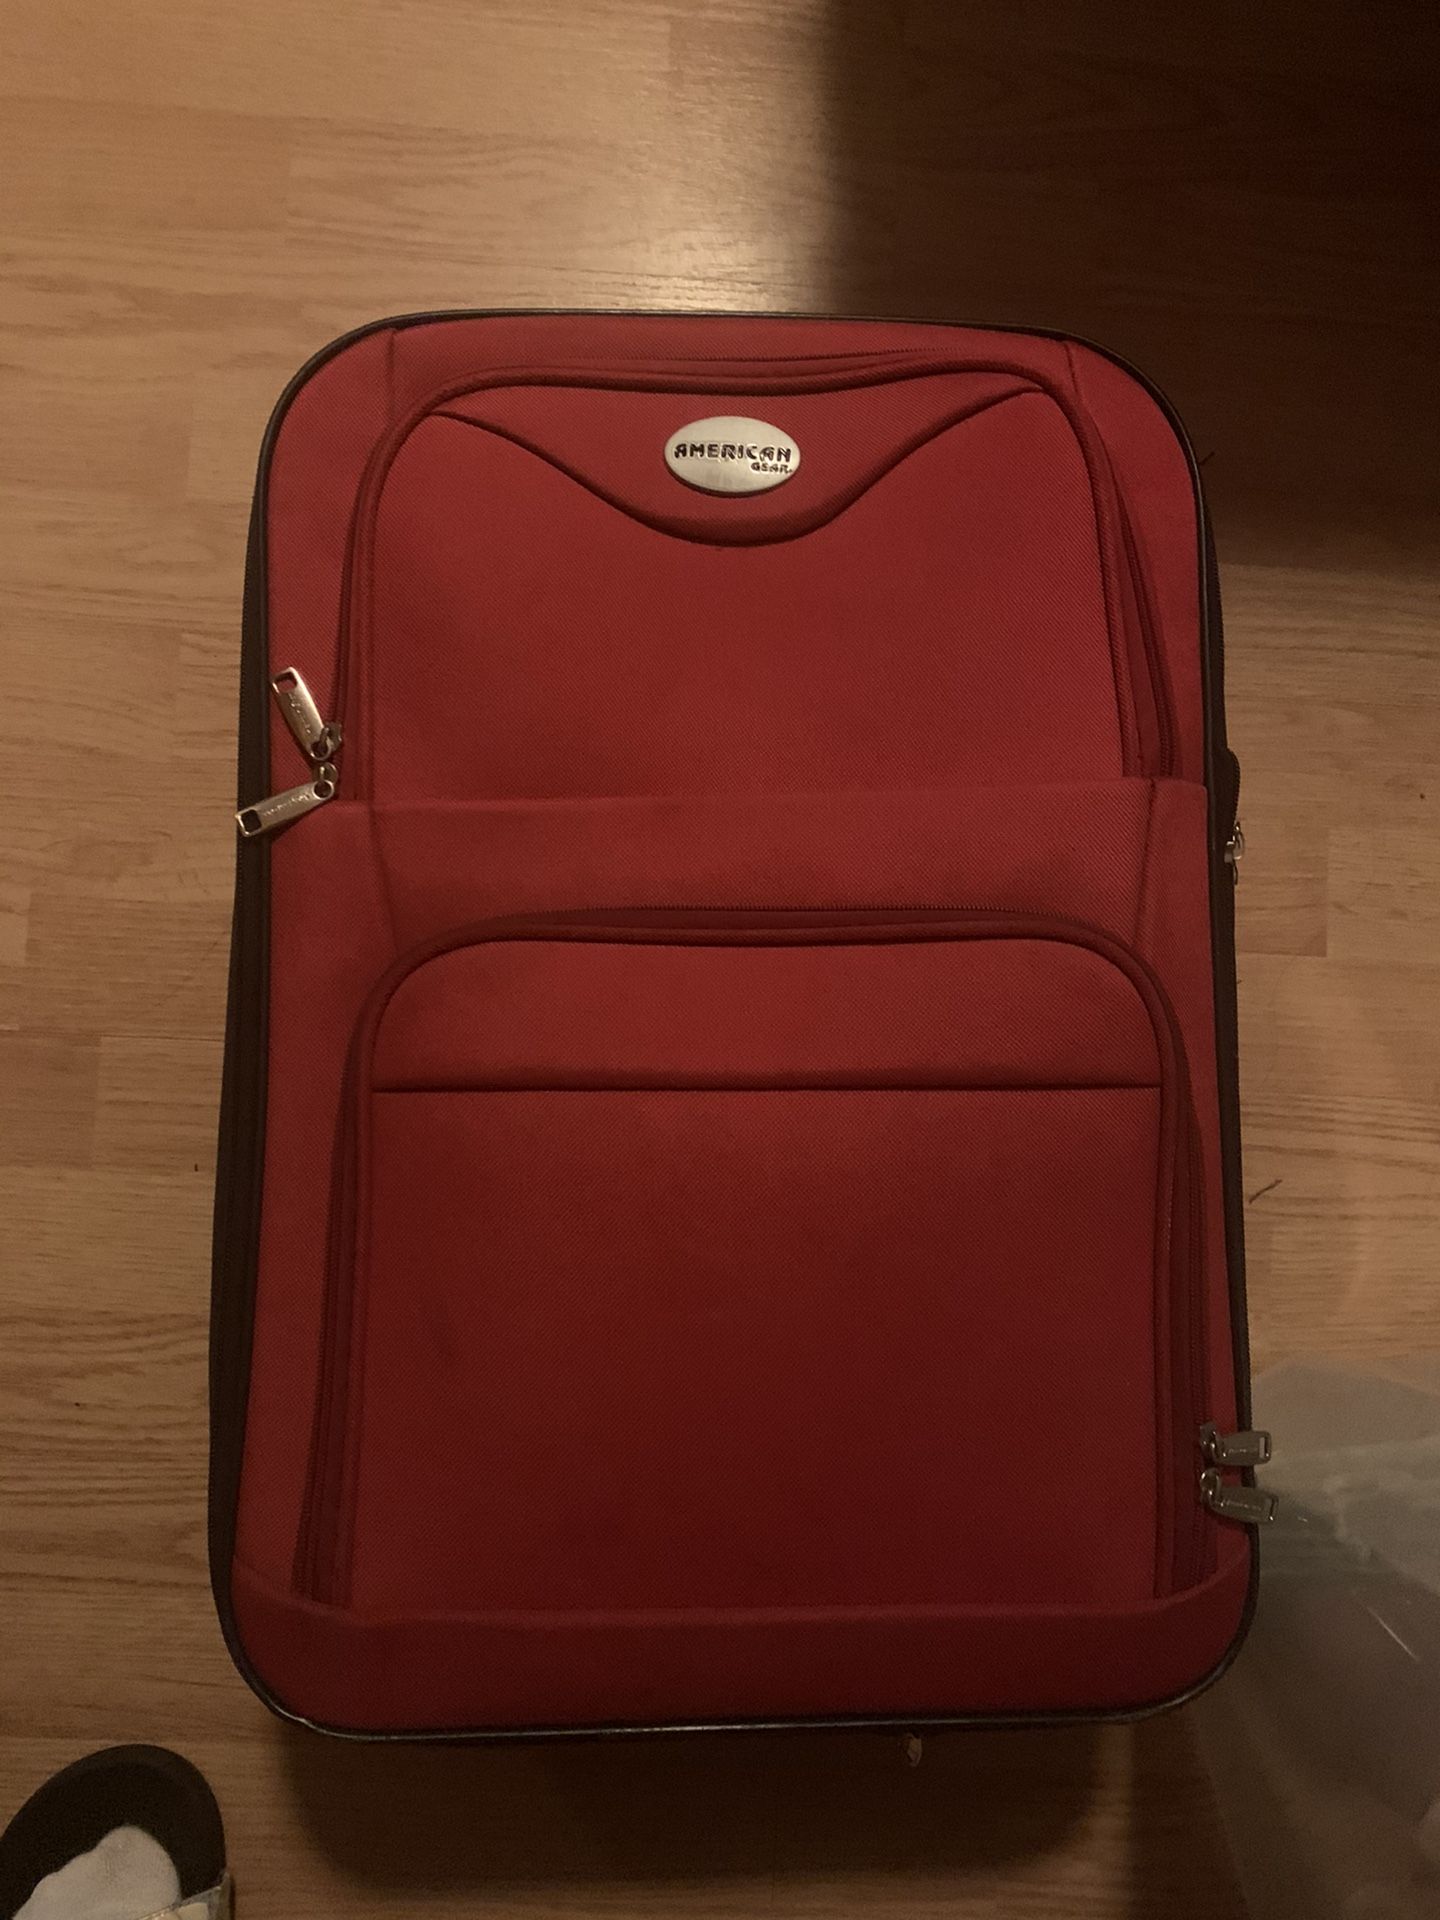 Luggage for carry on